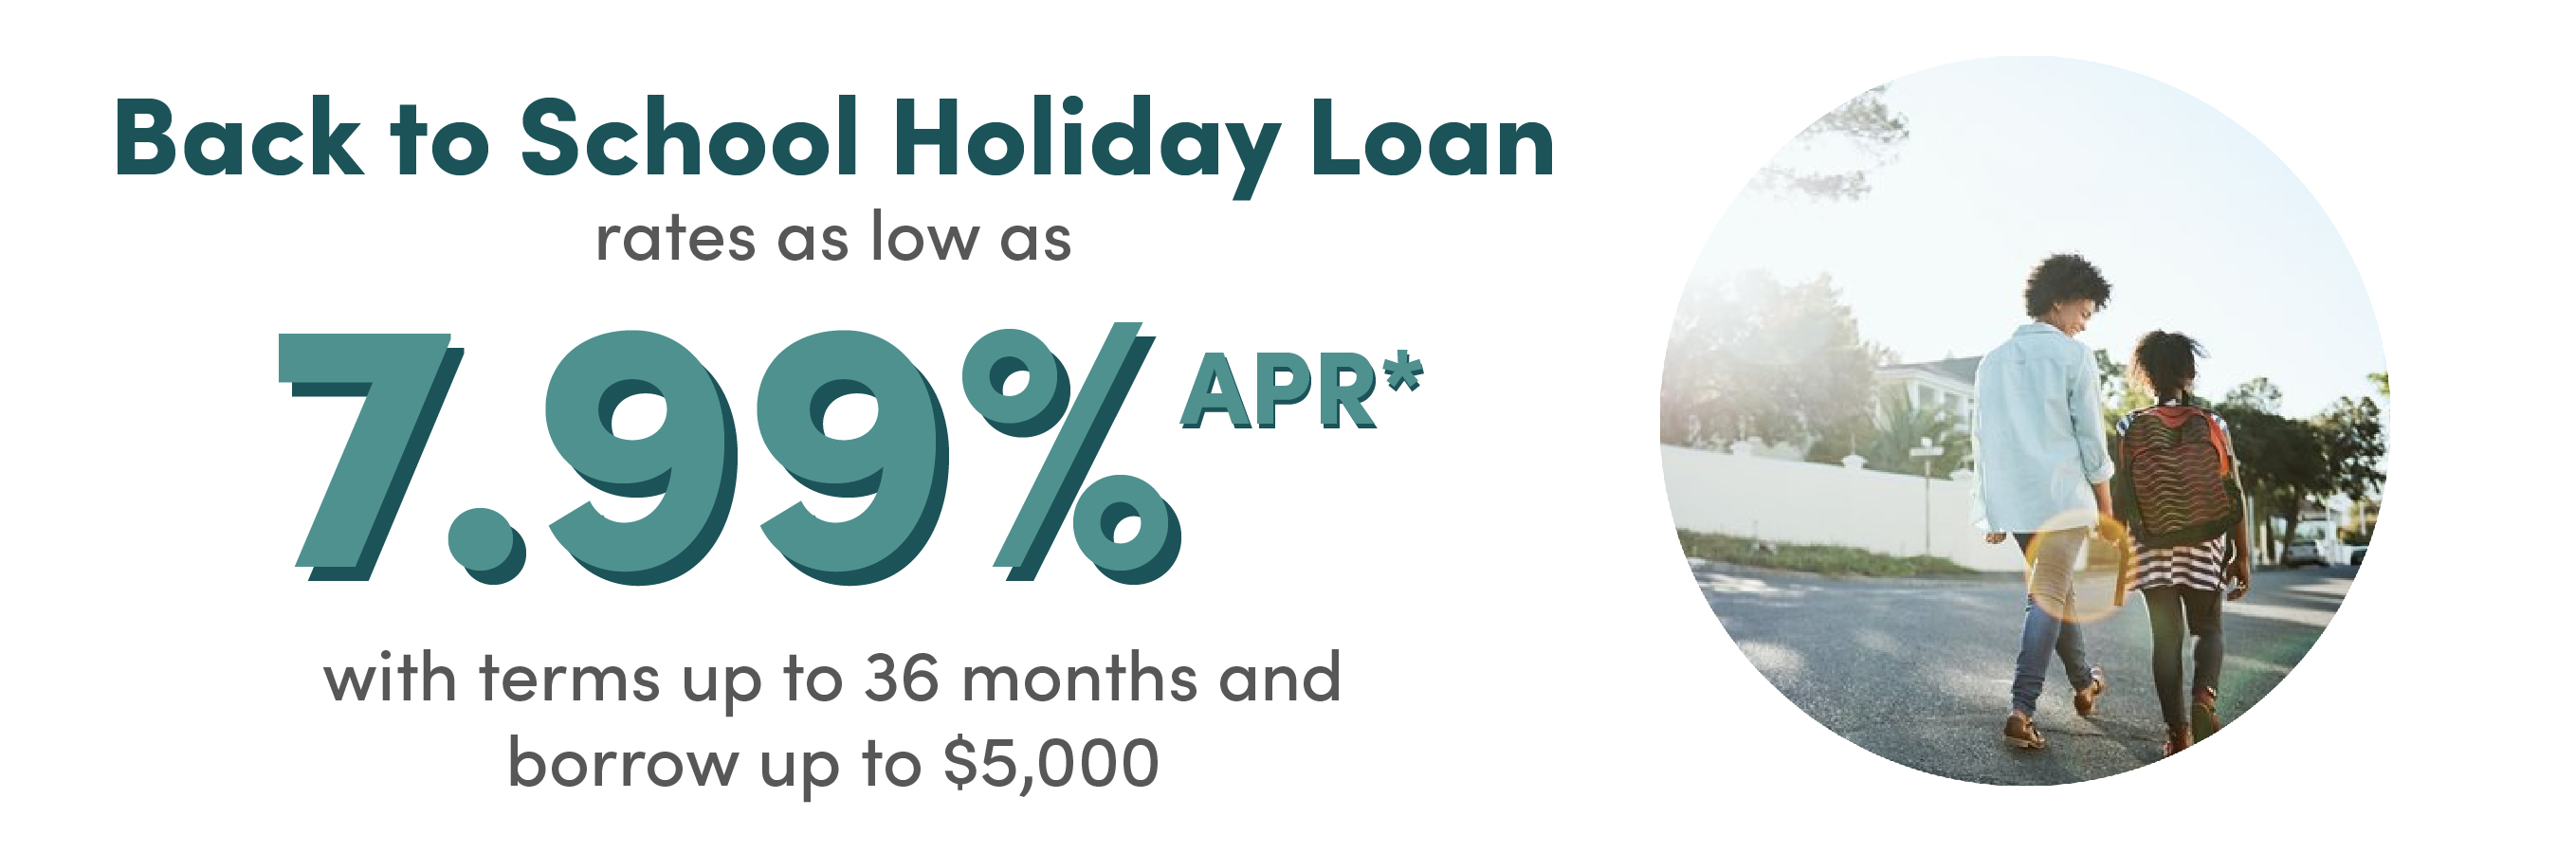 back to school loan rate as low as 7.99% APR for 36 months and up to $5,000.